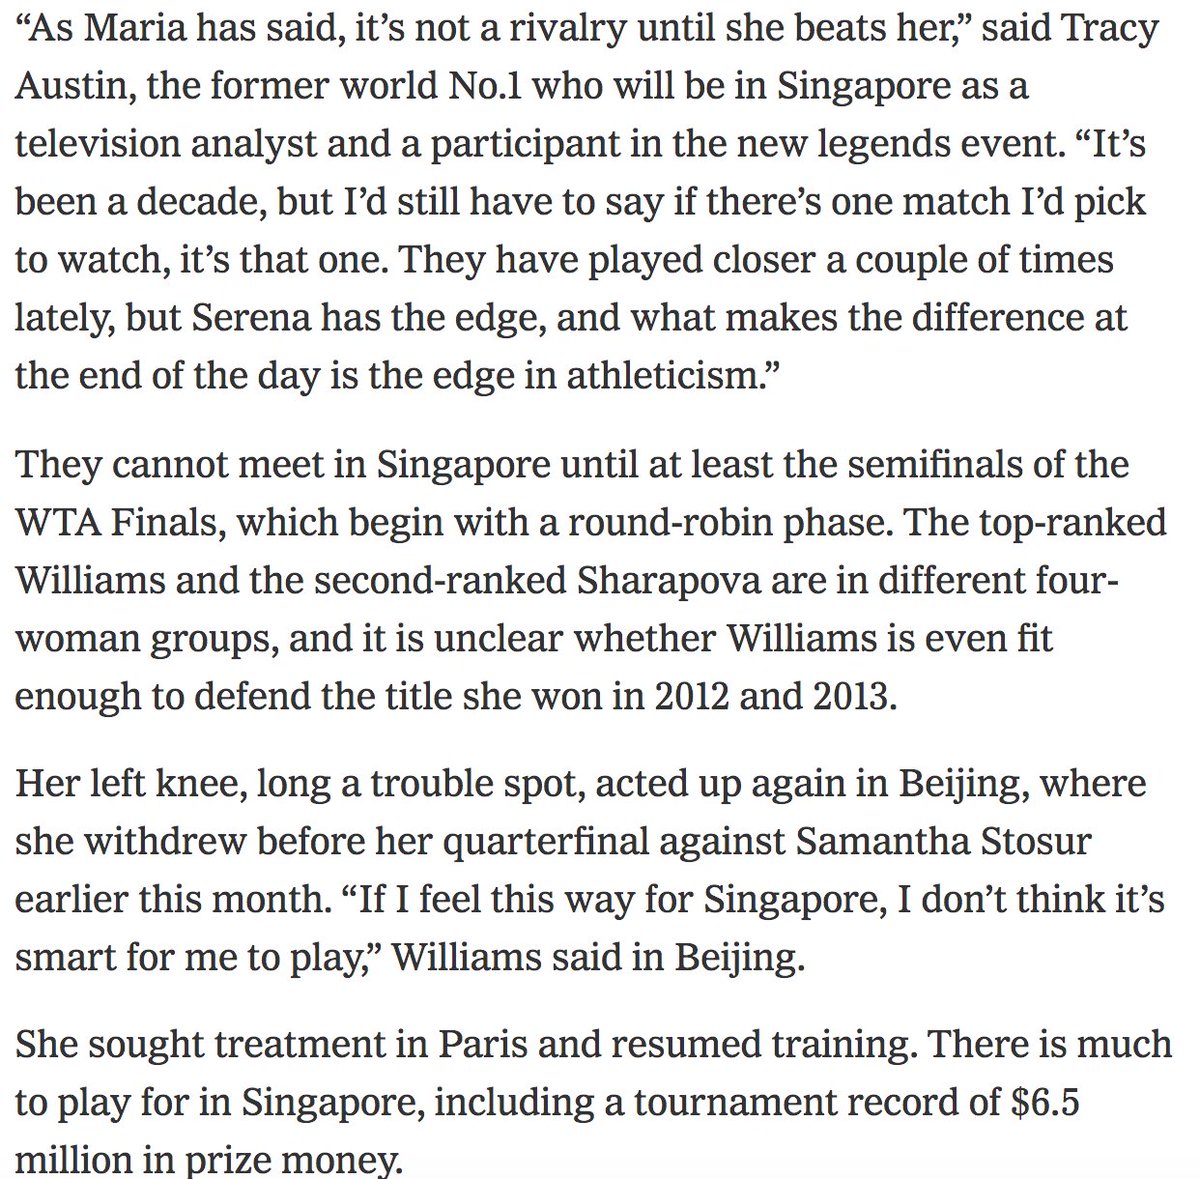 Sharapova was looking forward to the chance of playing Williams at the 2014 WTA Championships and taking the #1 ranking. Williams was not in top form, struggling with a knee injury that caused her to pull out of two tournaments in the Asian swing.